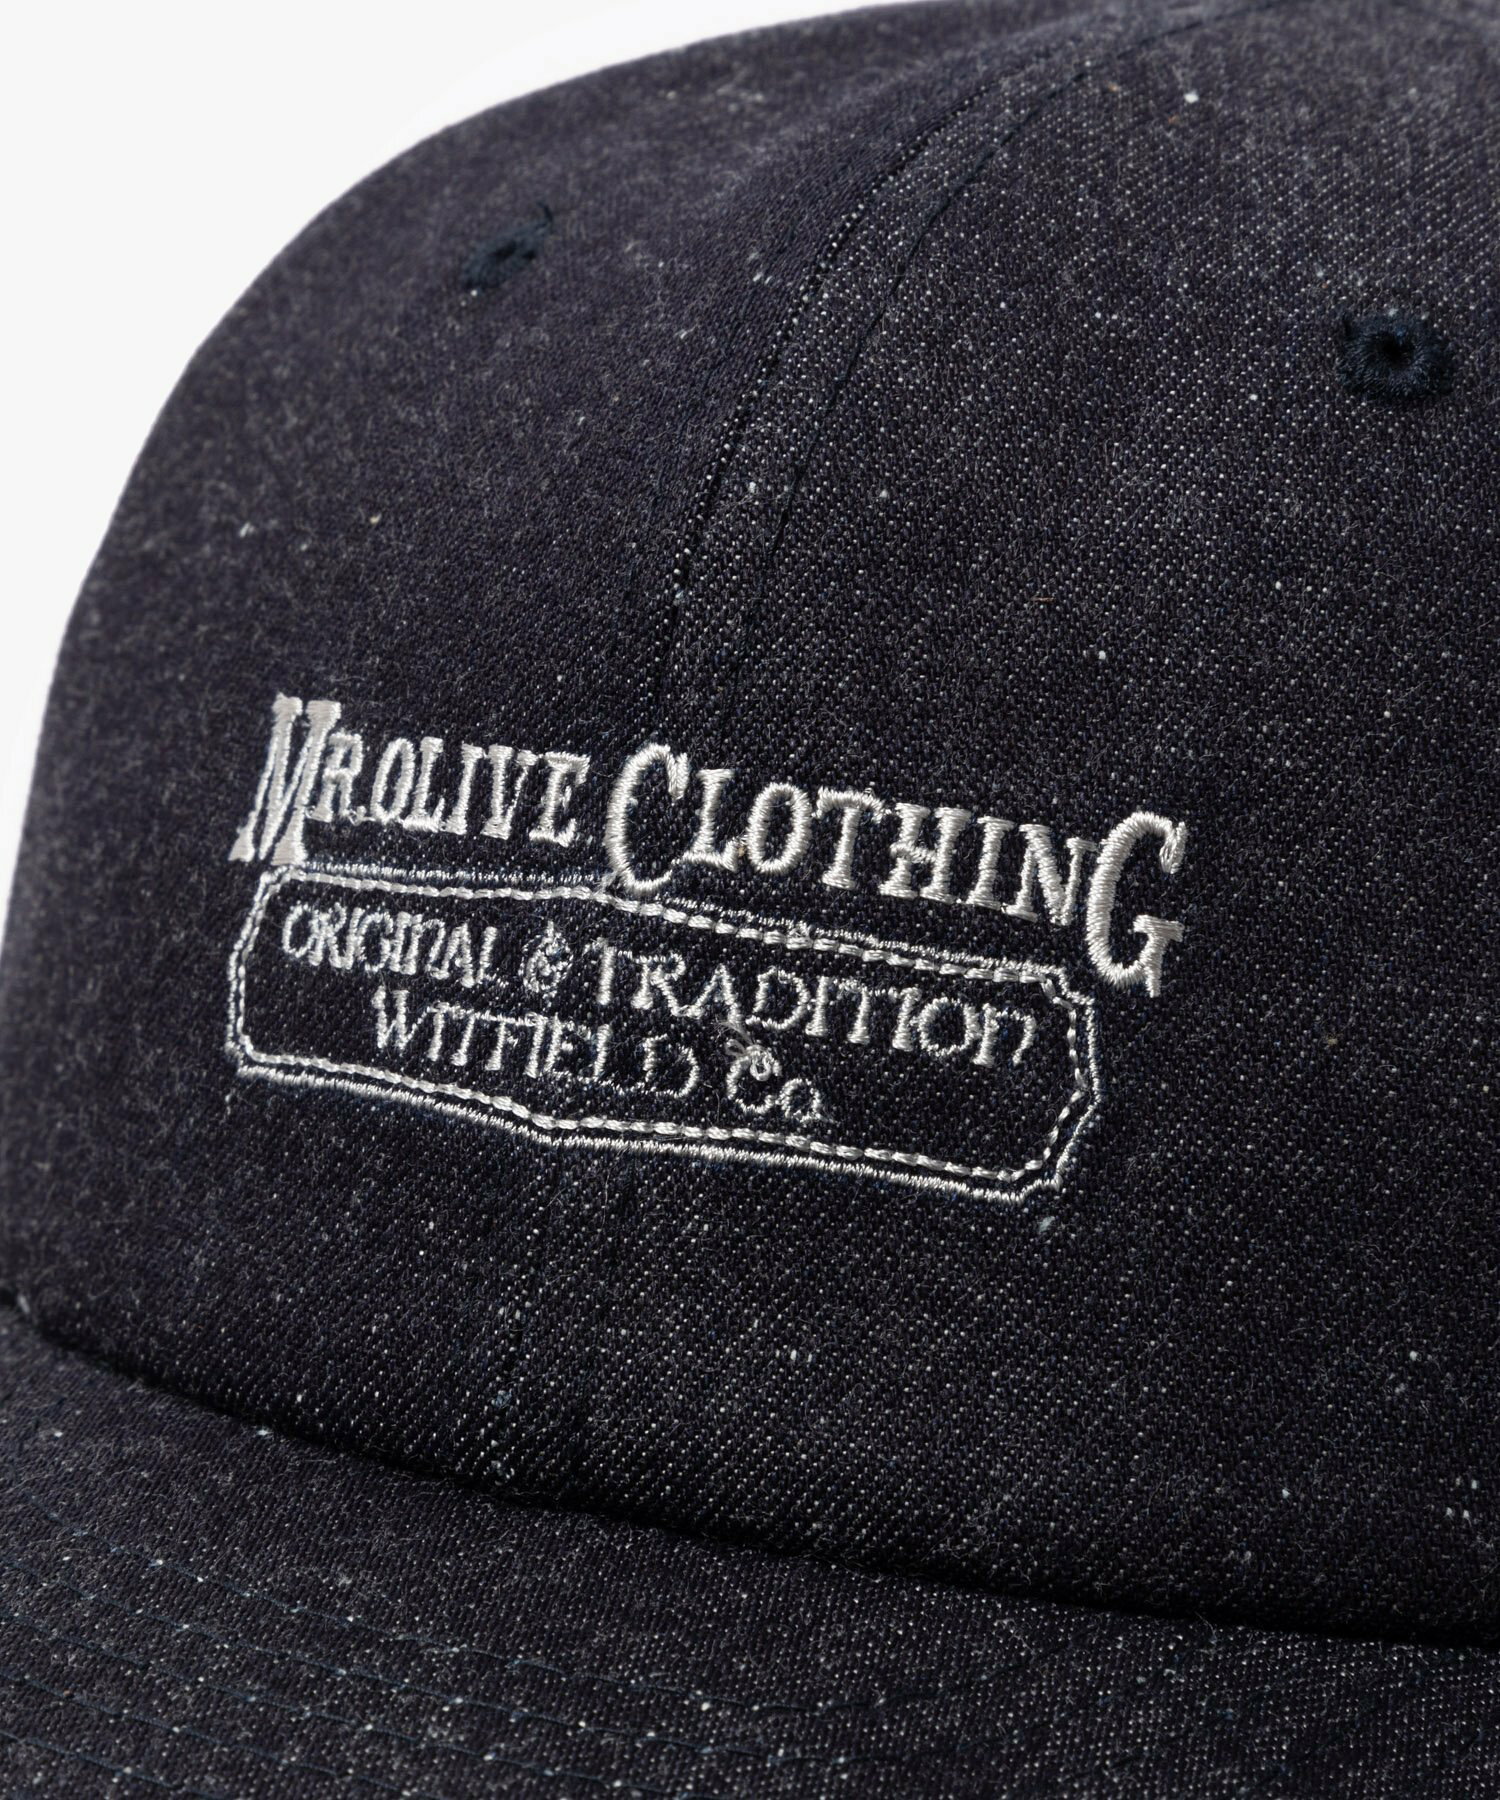 RACAL*MR.OLIVE COLLABORATION / EMBROIDERY B.B CAP